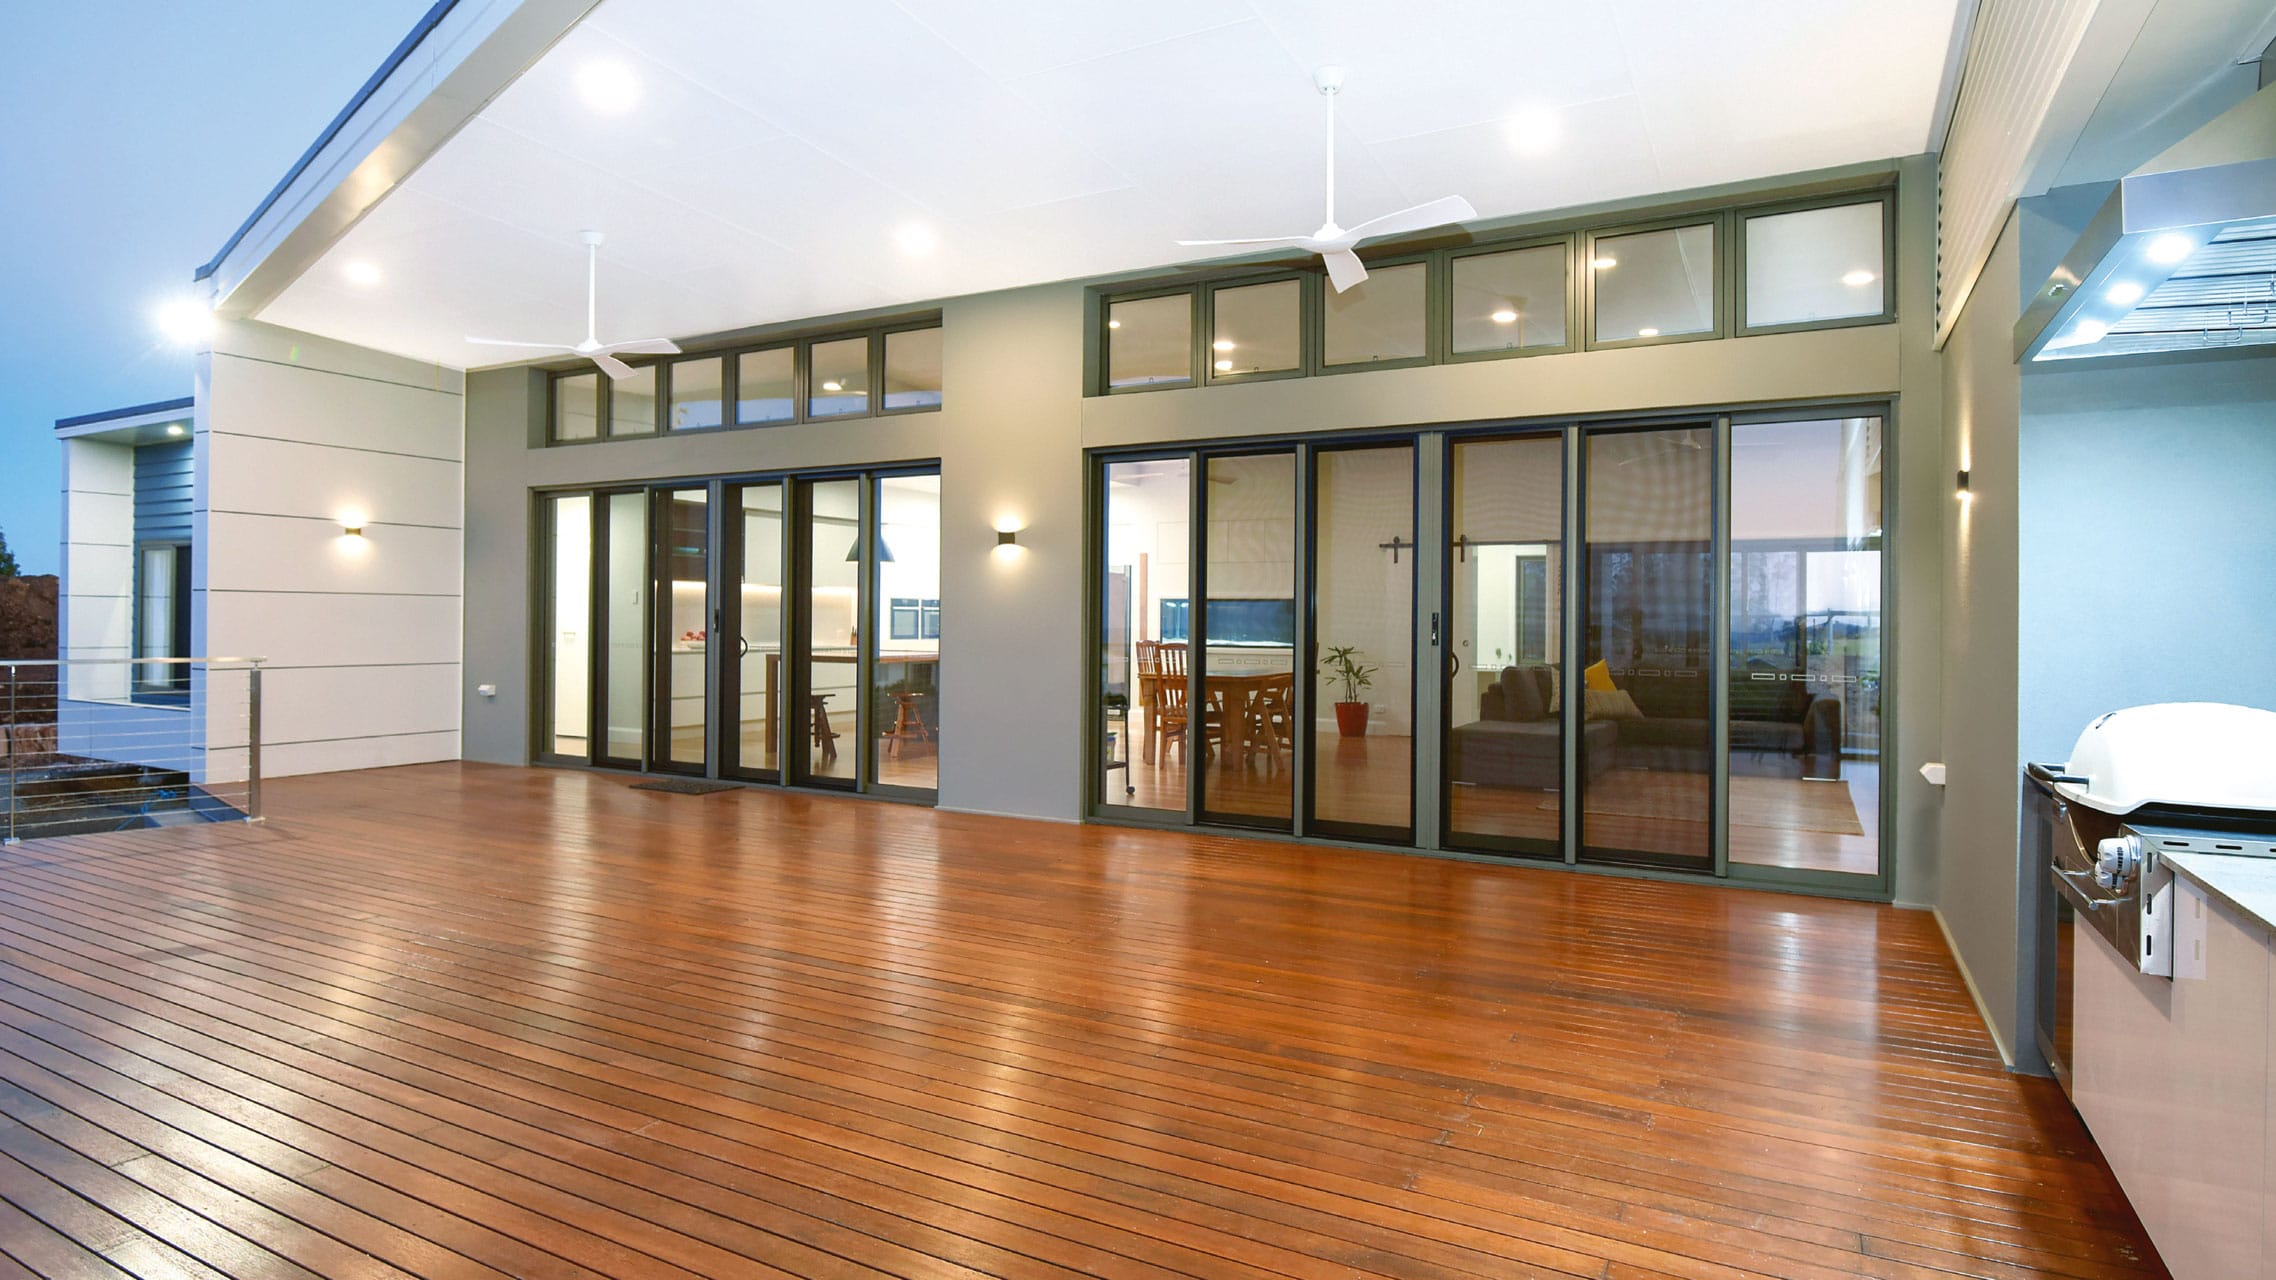 Thermal Break Sliding Doors and Awning Windows for energy efficiency